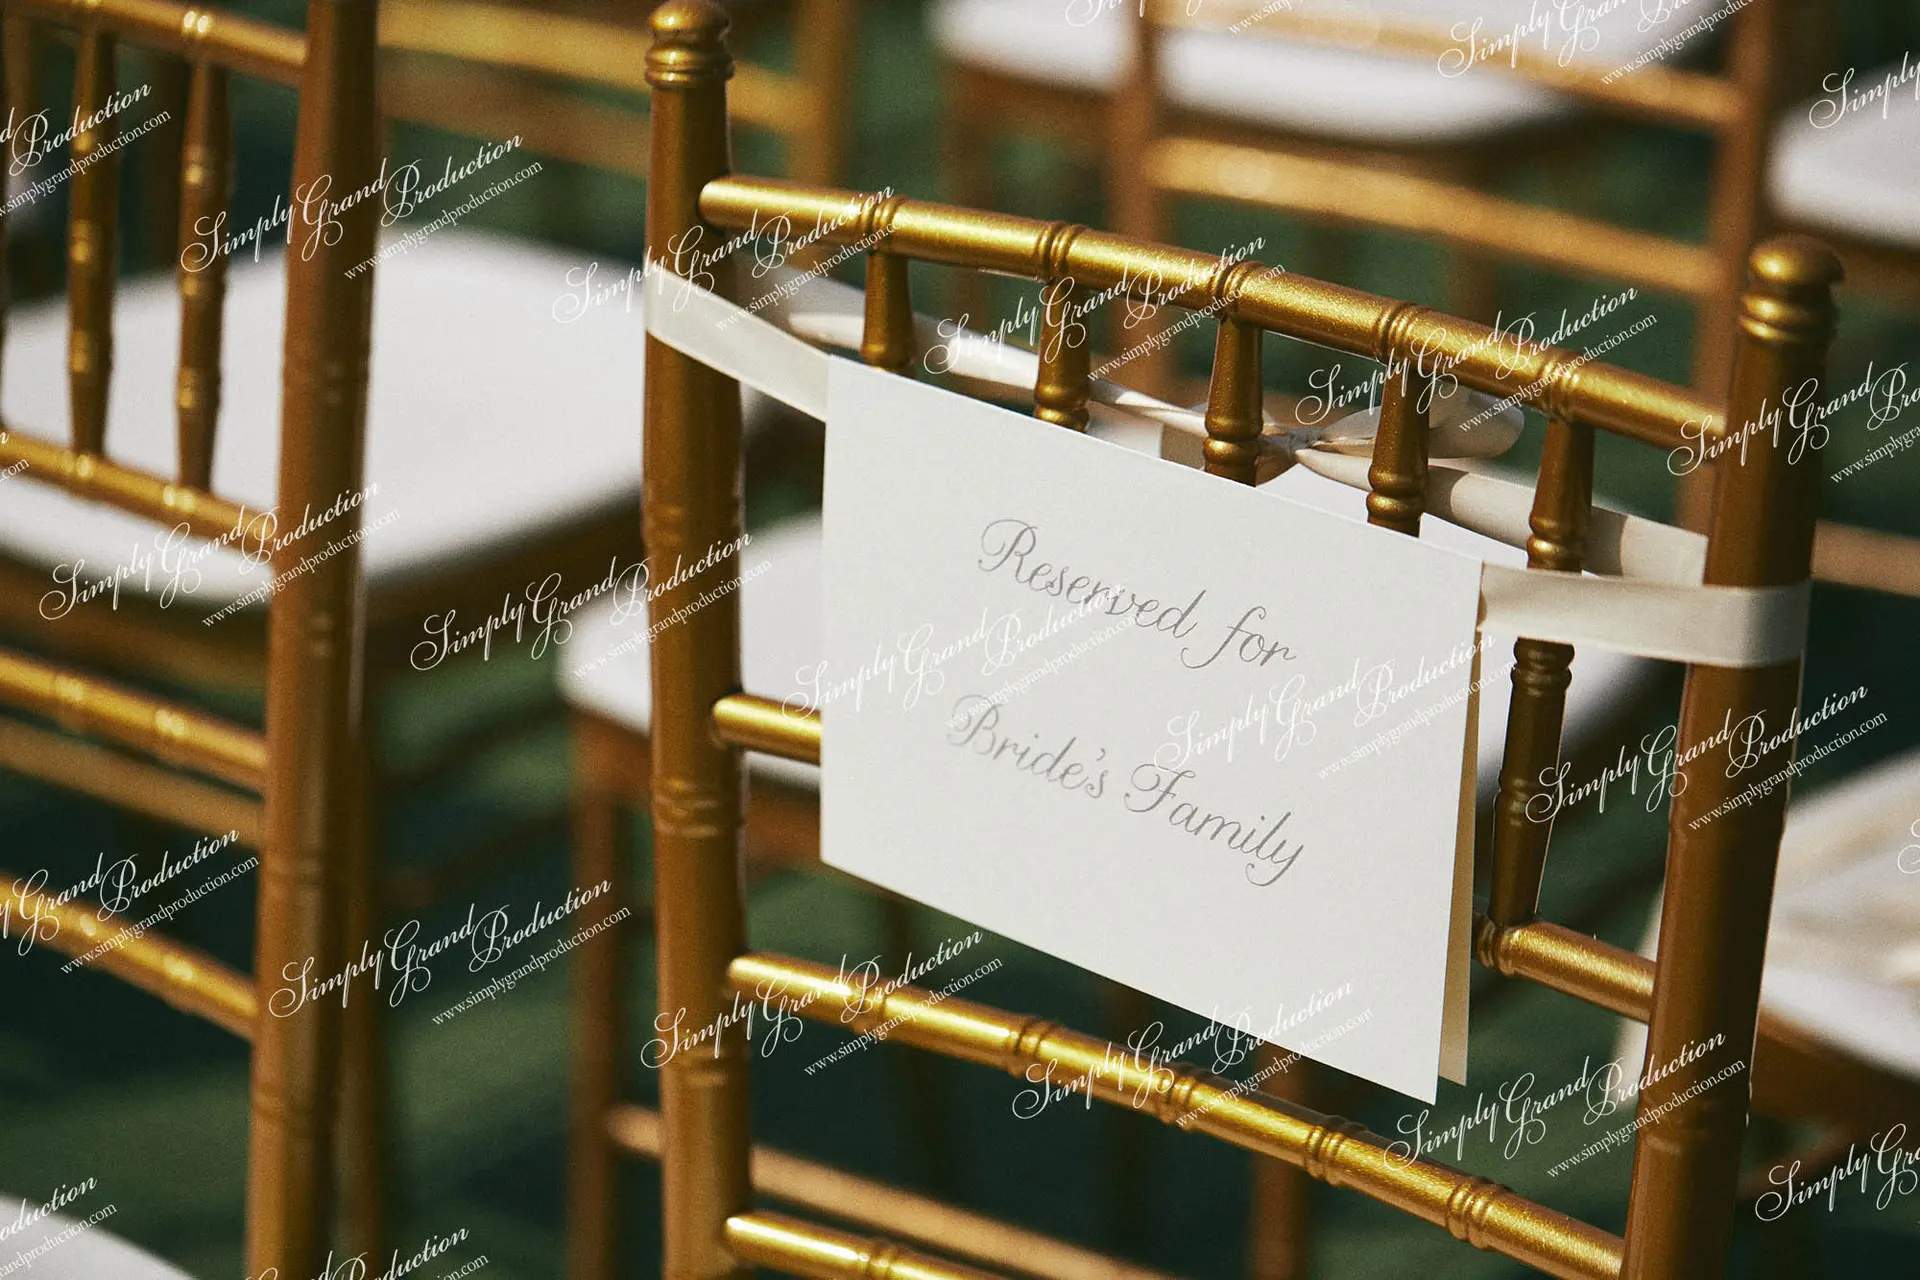 Simply_Grand_Production_Outdoor_wedding_decoration_gold_chair_outdoordecor_Country_Club_2_9.jpg